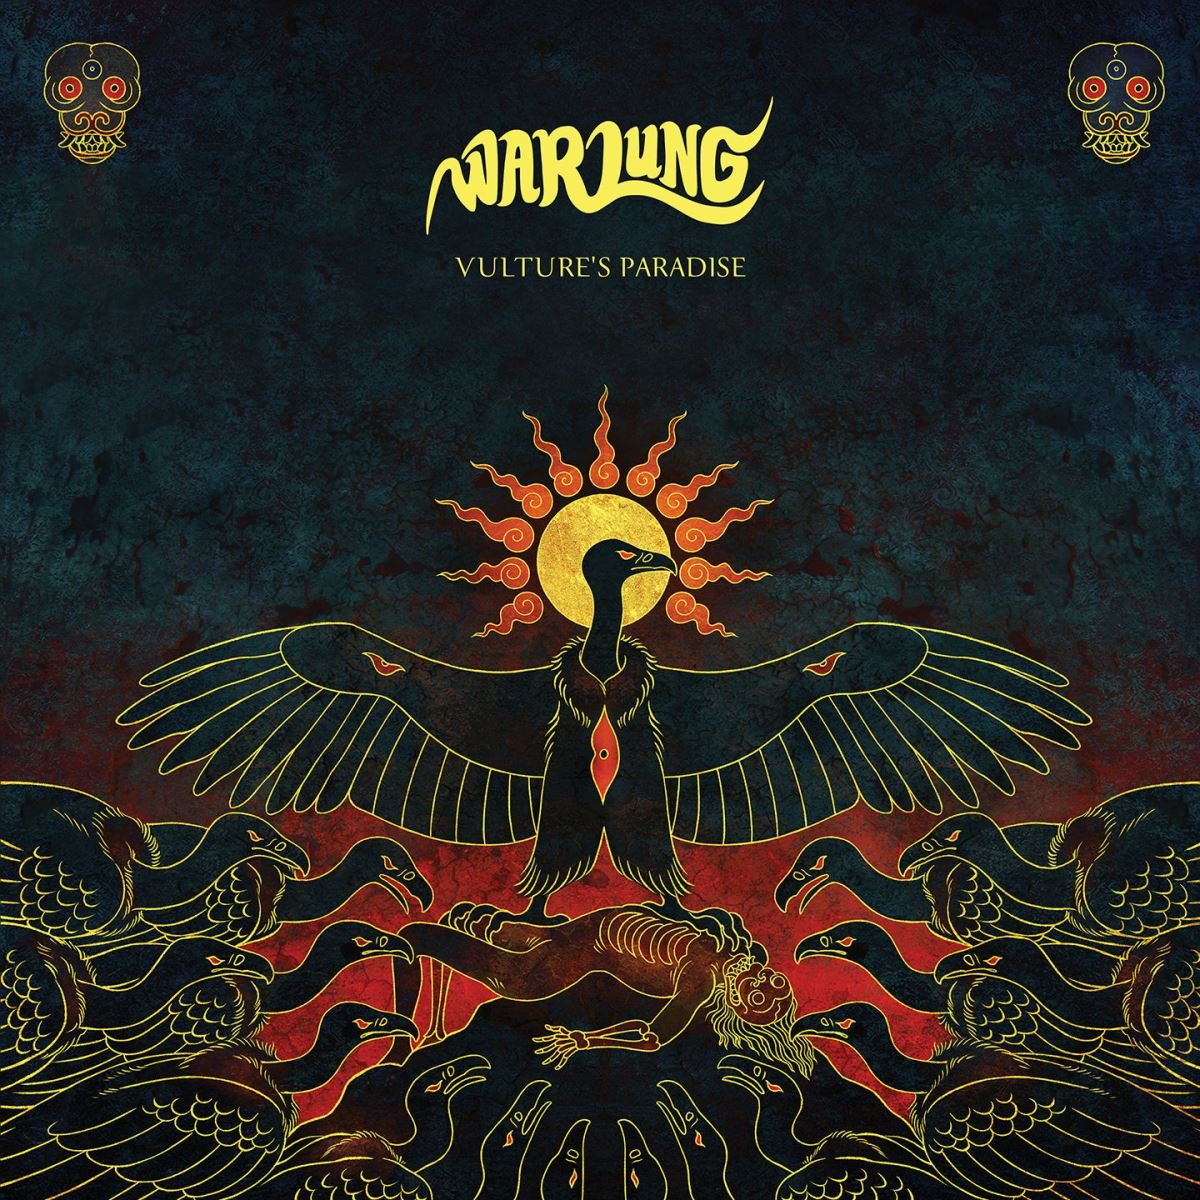 Warlung - Vulture's Paradise (2022) FLAC Download